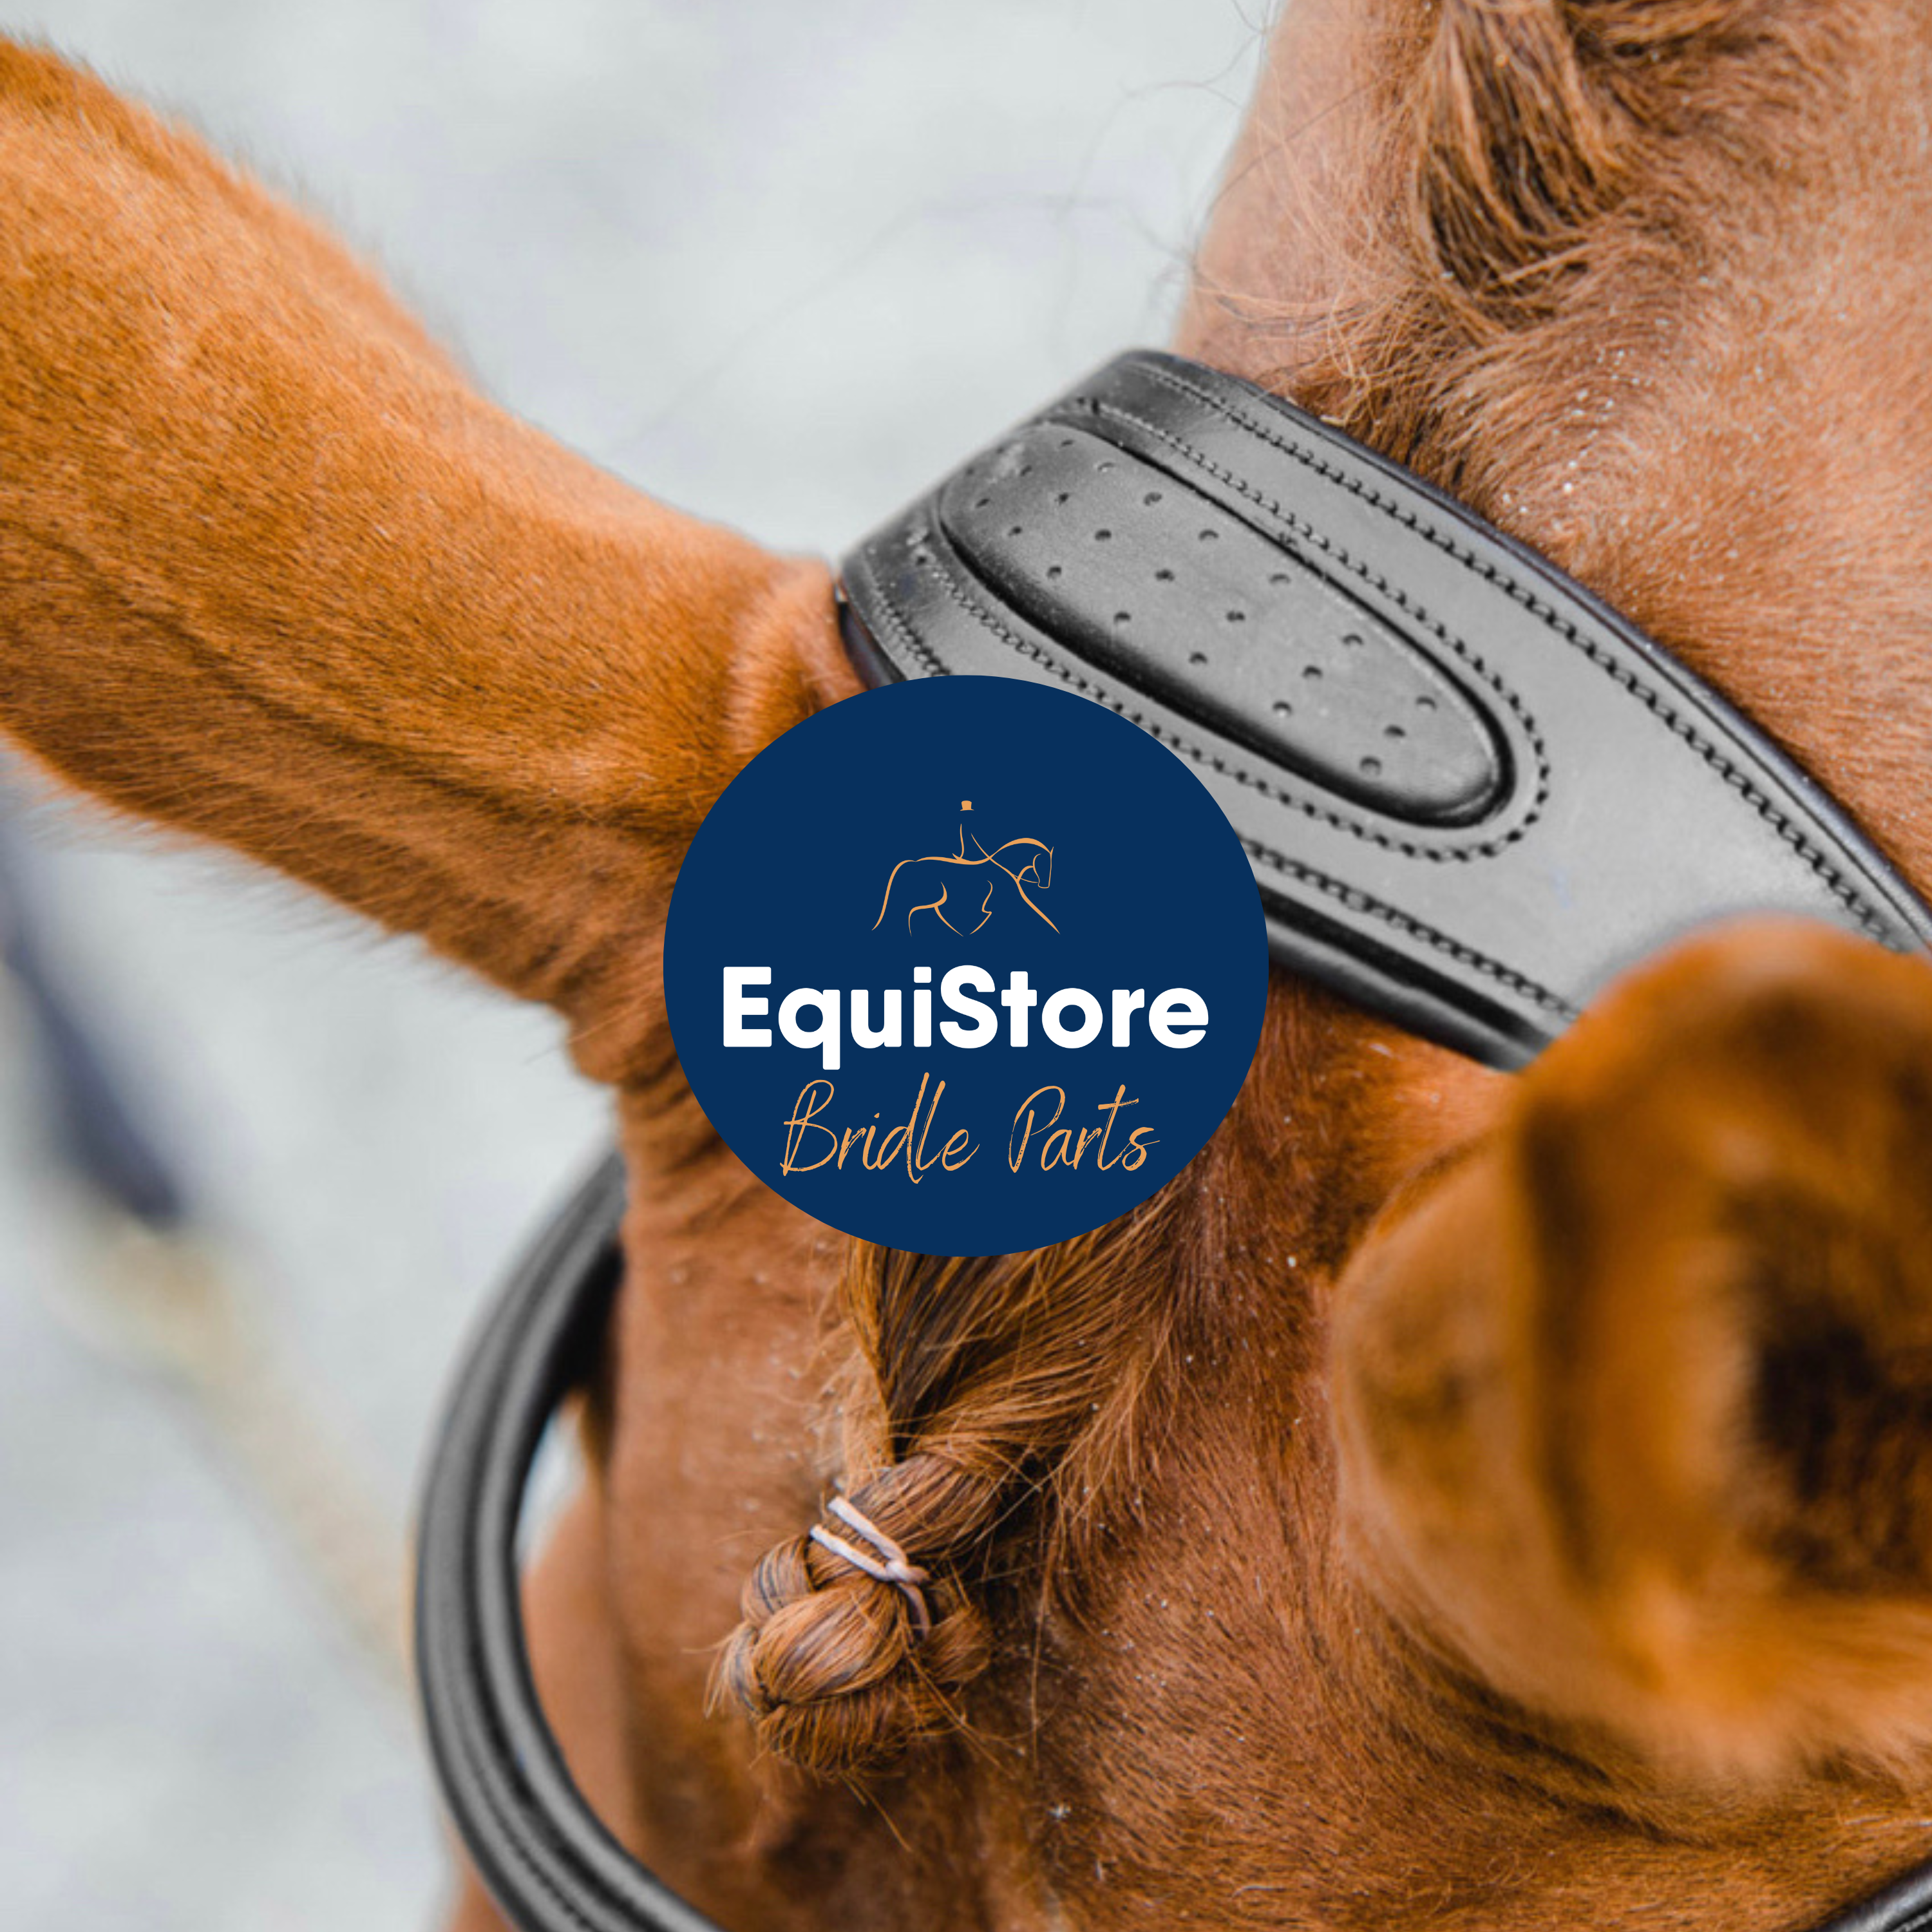 A range of bridle parts and bridle accessories for horses, available at EquiStore in Ireland.